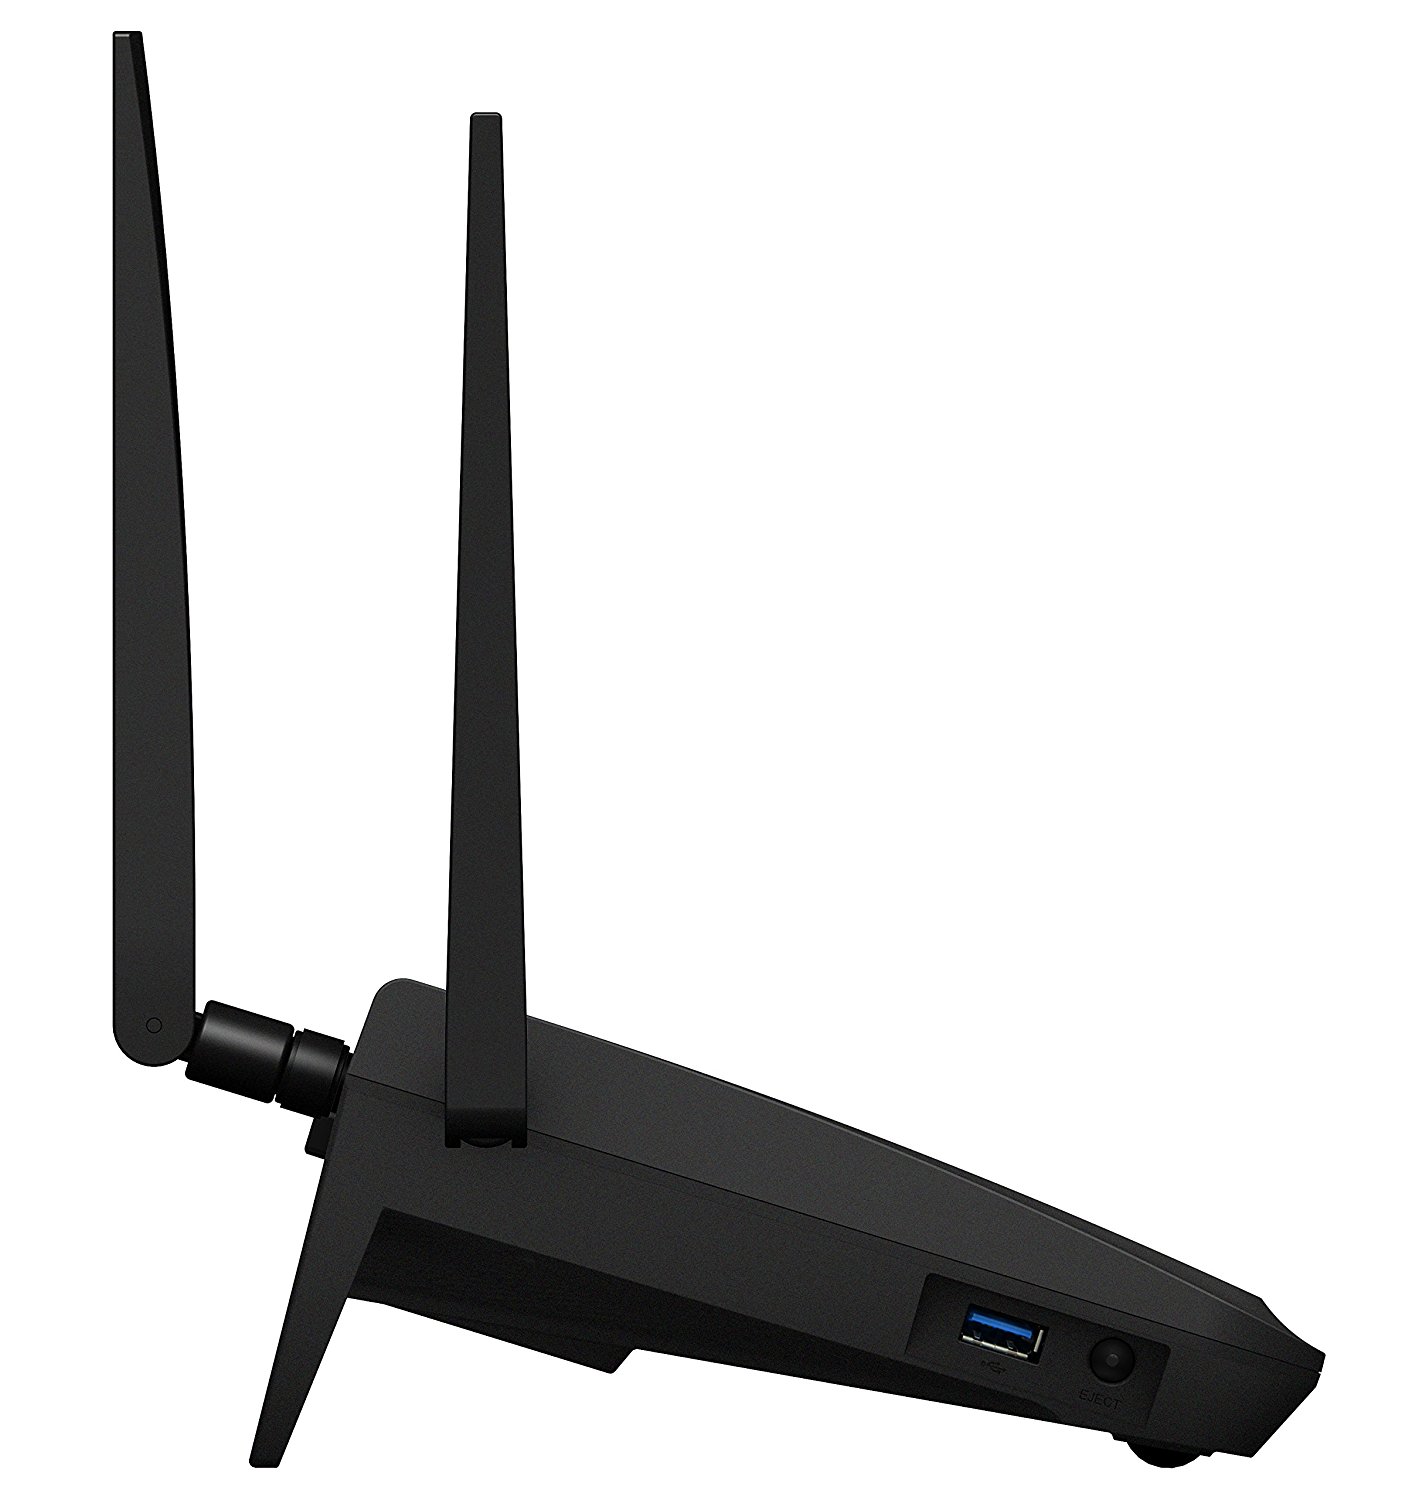 A Look At Synology's RT2600ac Wireless Router – Techgage